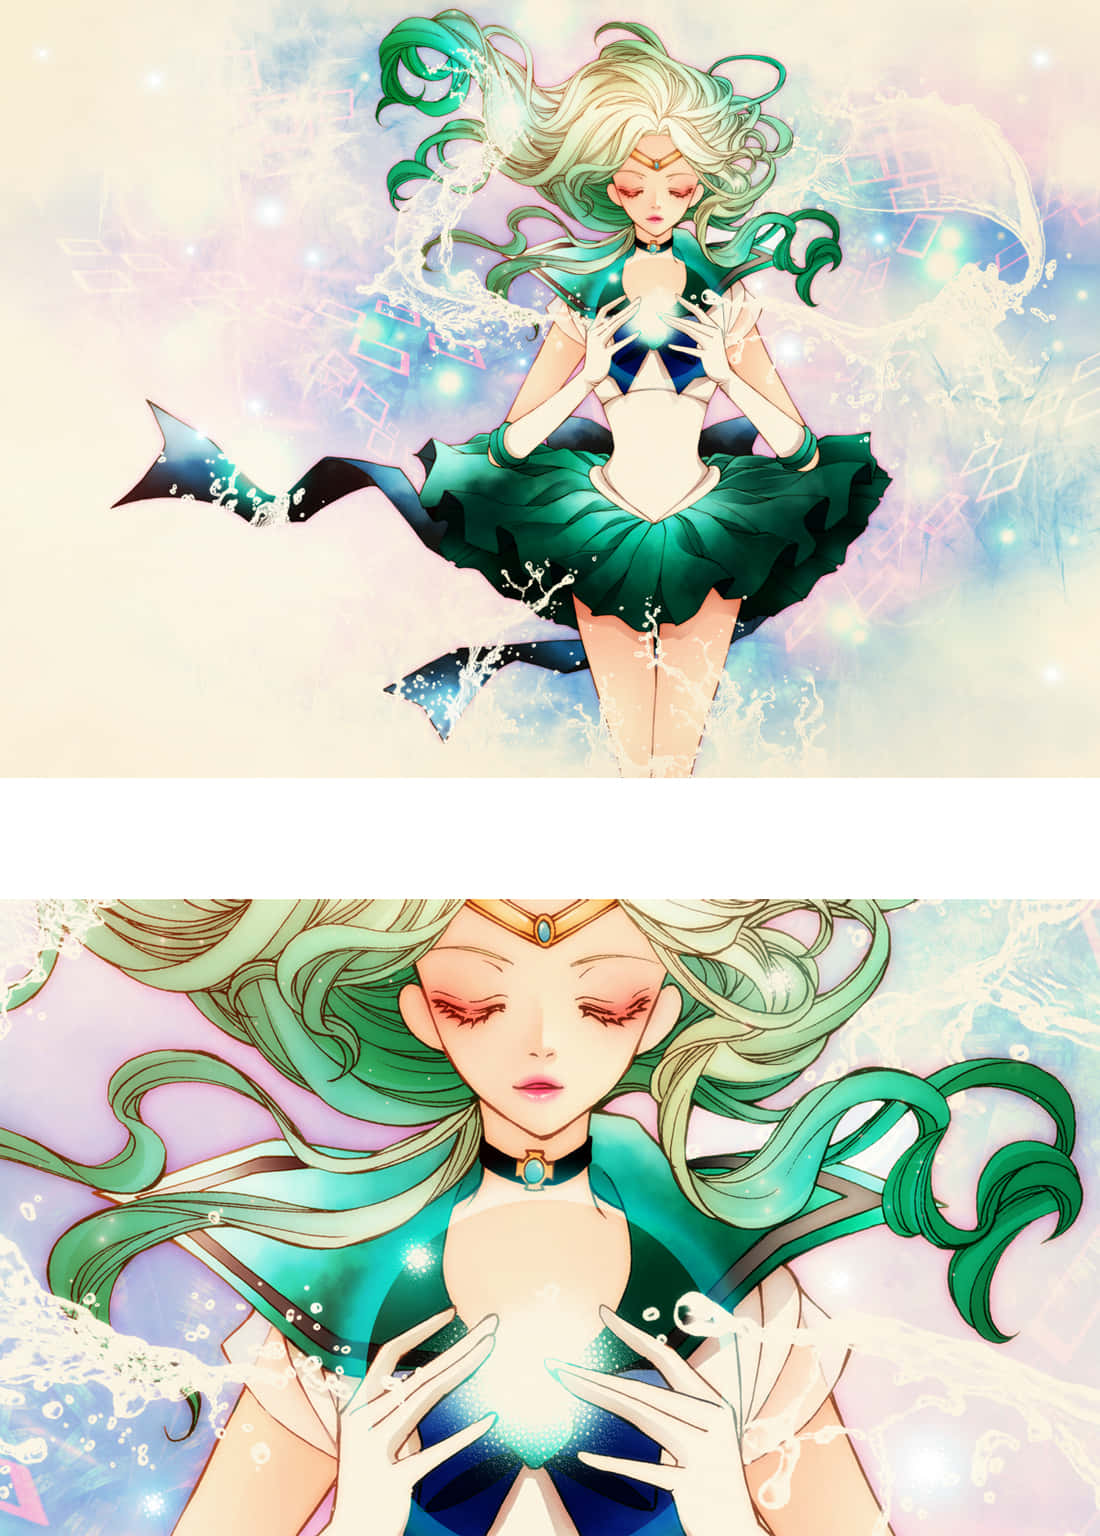 The powerful Sailor Neptune ready to fight against evil. Wallpaper